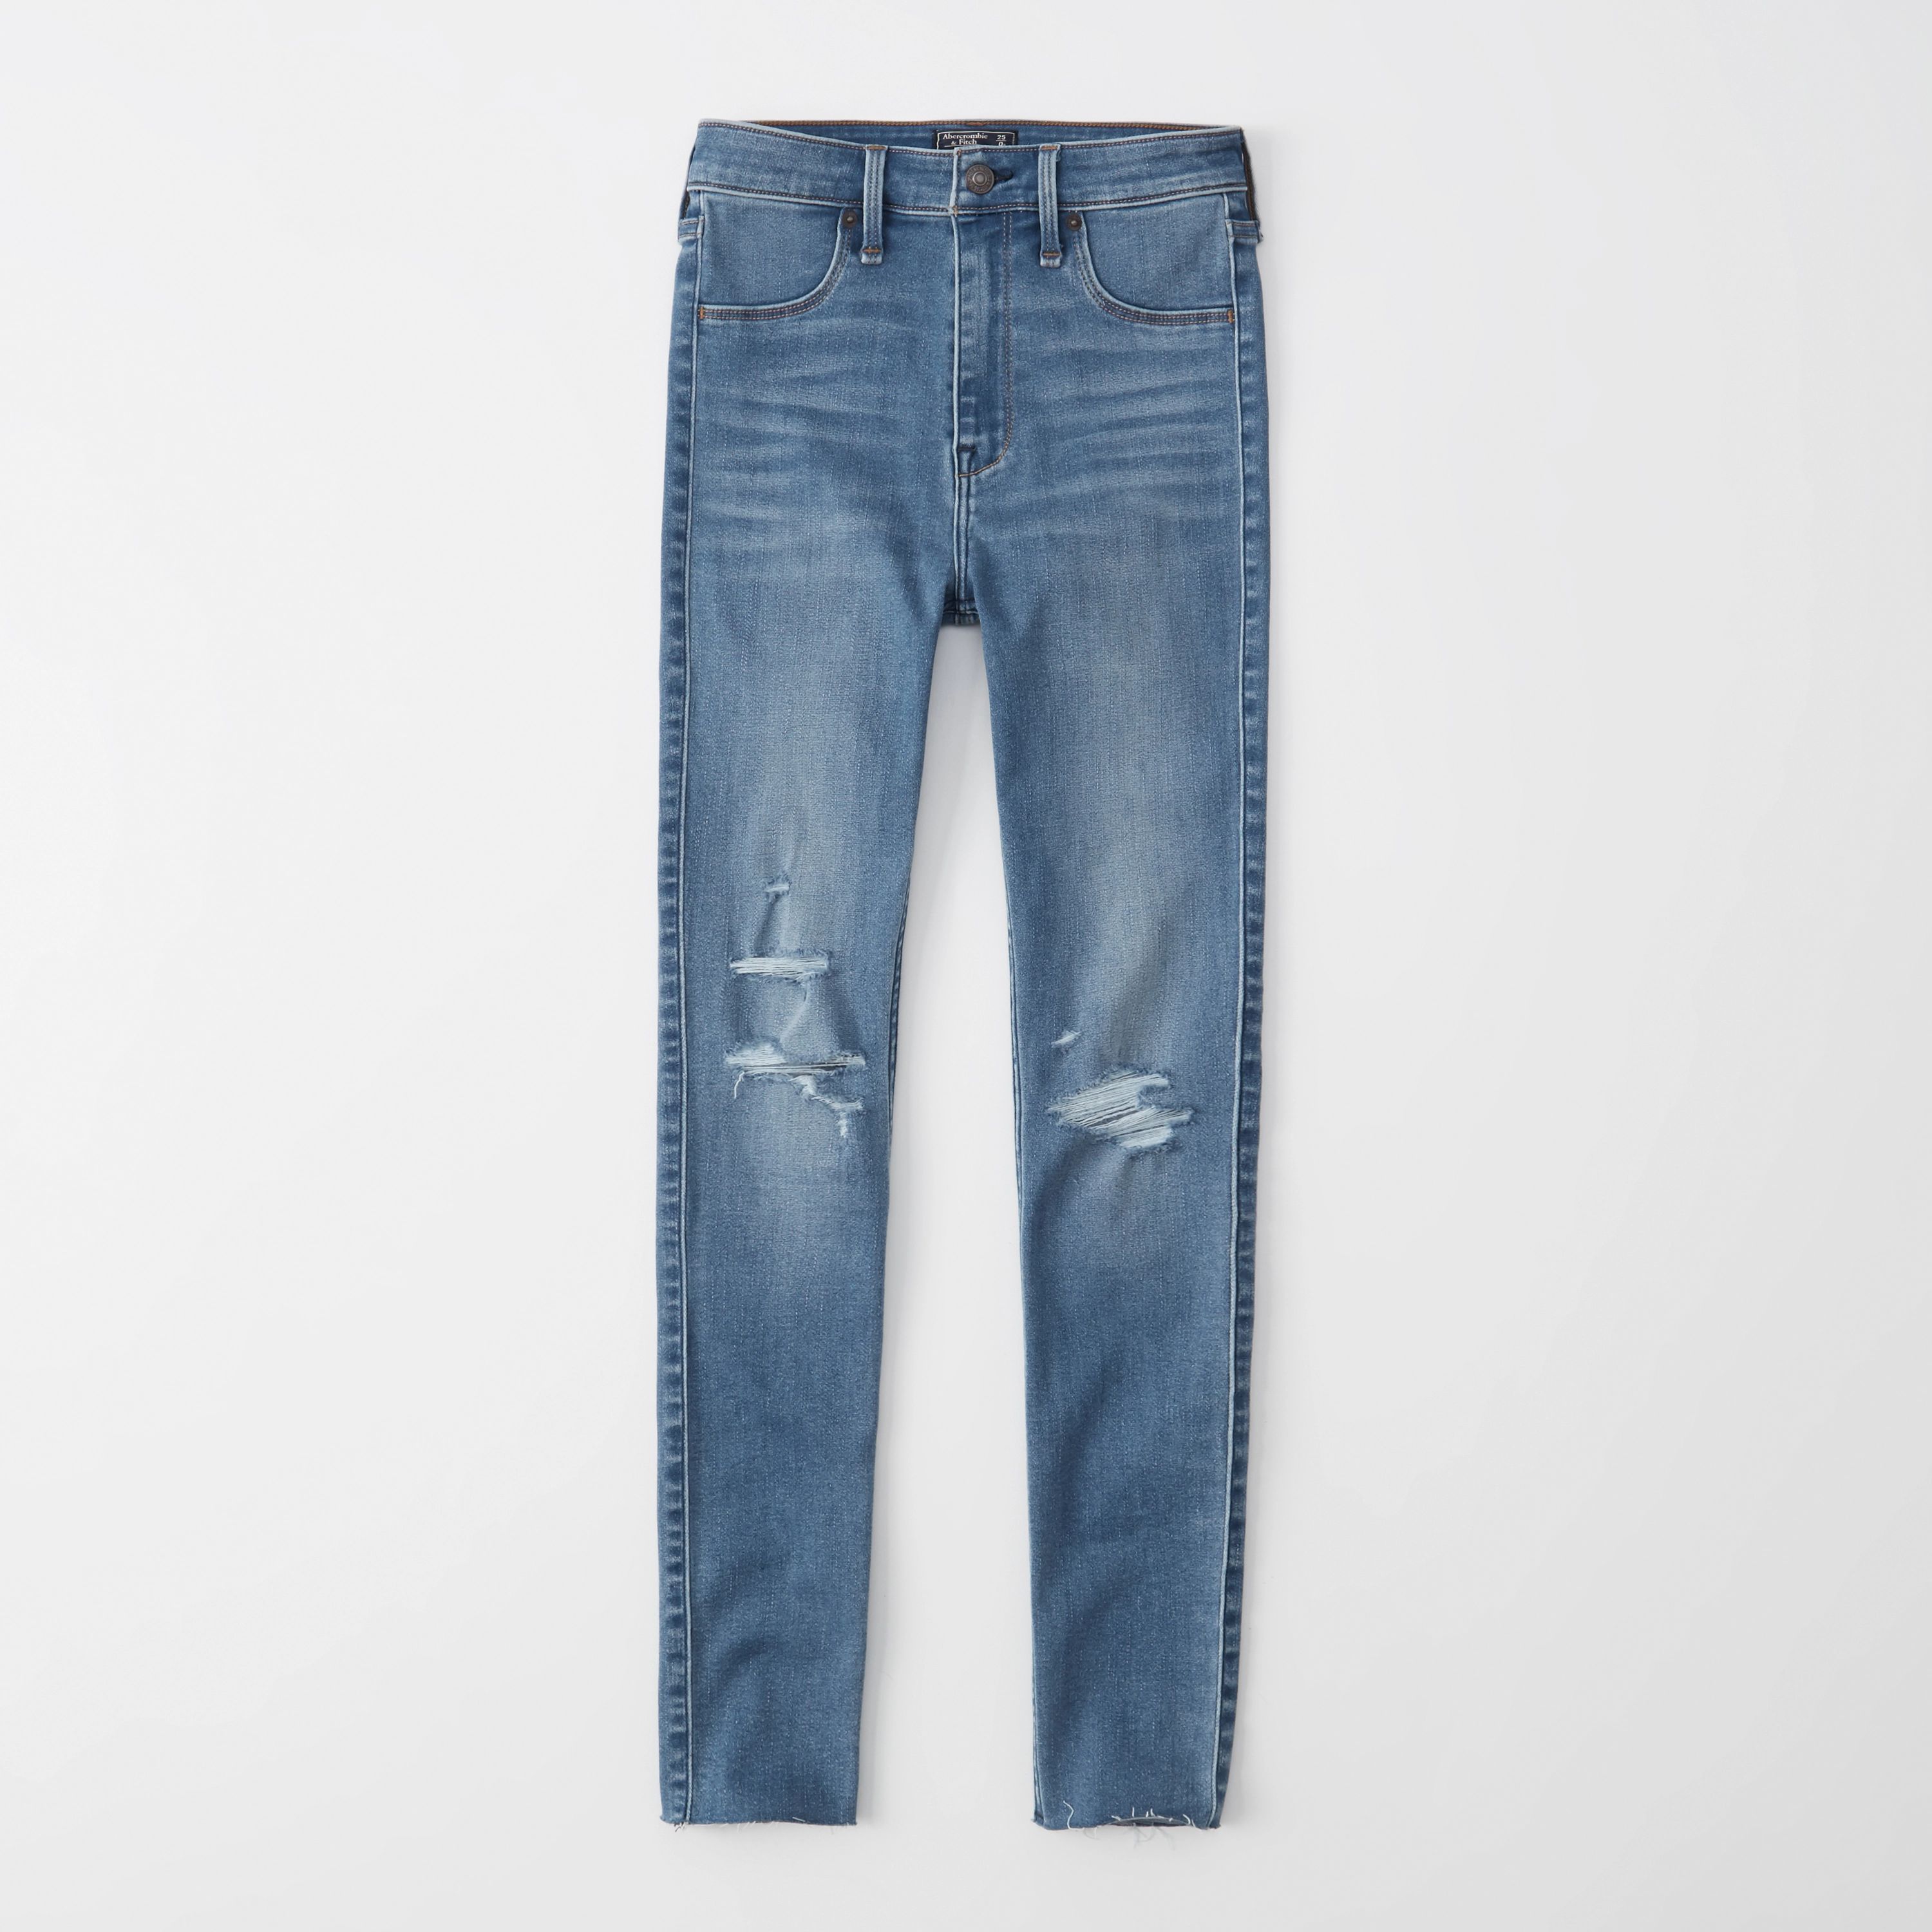 Women's Ripped High Rise Jean Leggings | Women's New Arrivals | Abercrombie.com | Abercrombie & Fitch (US)